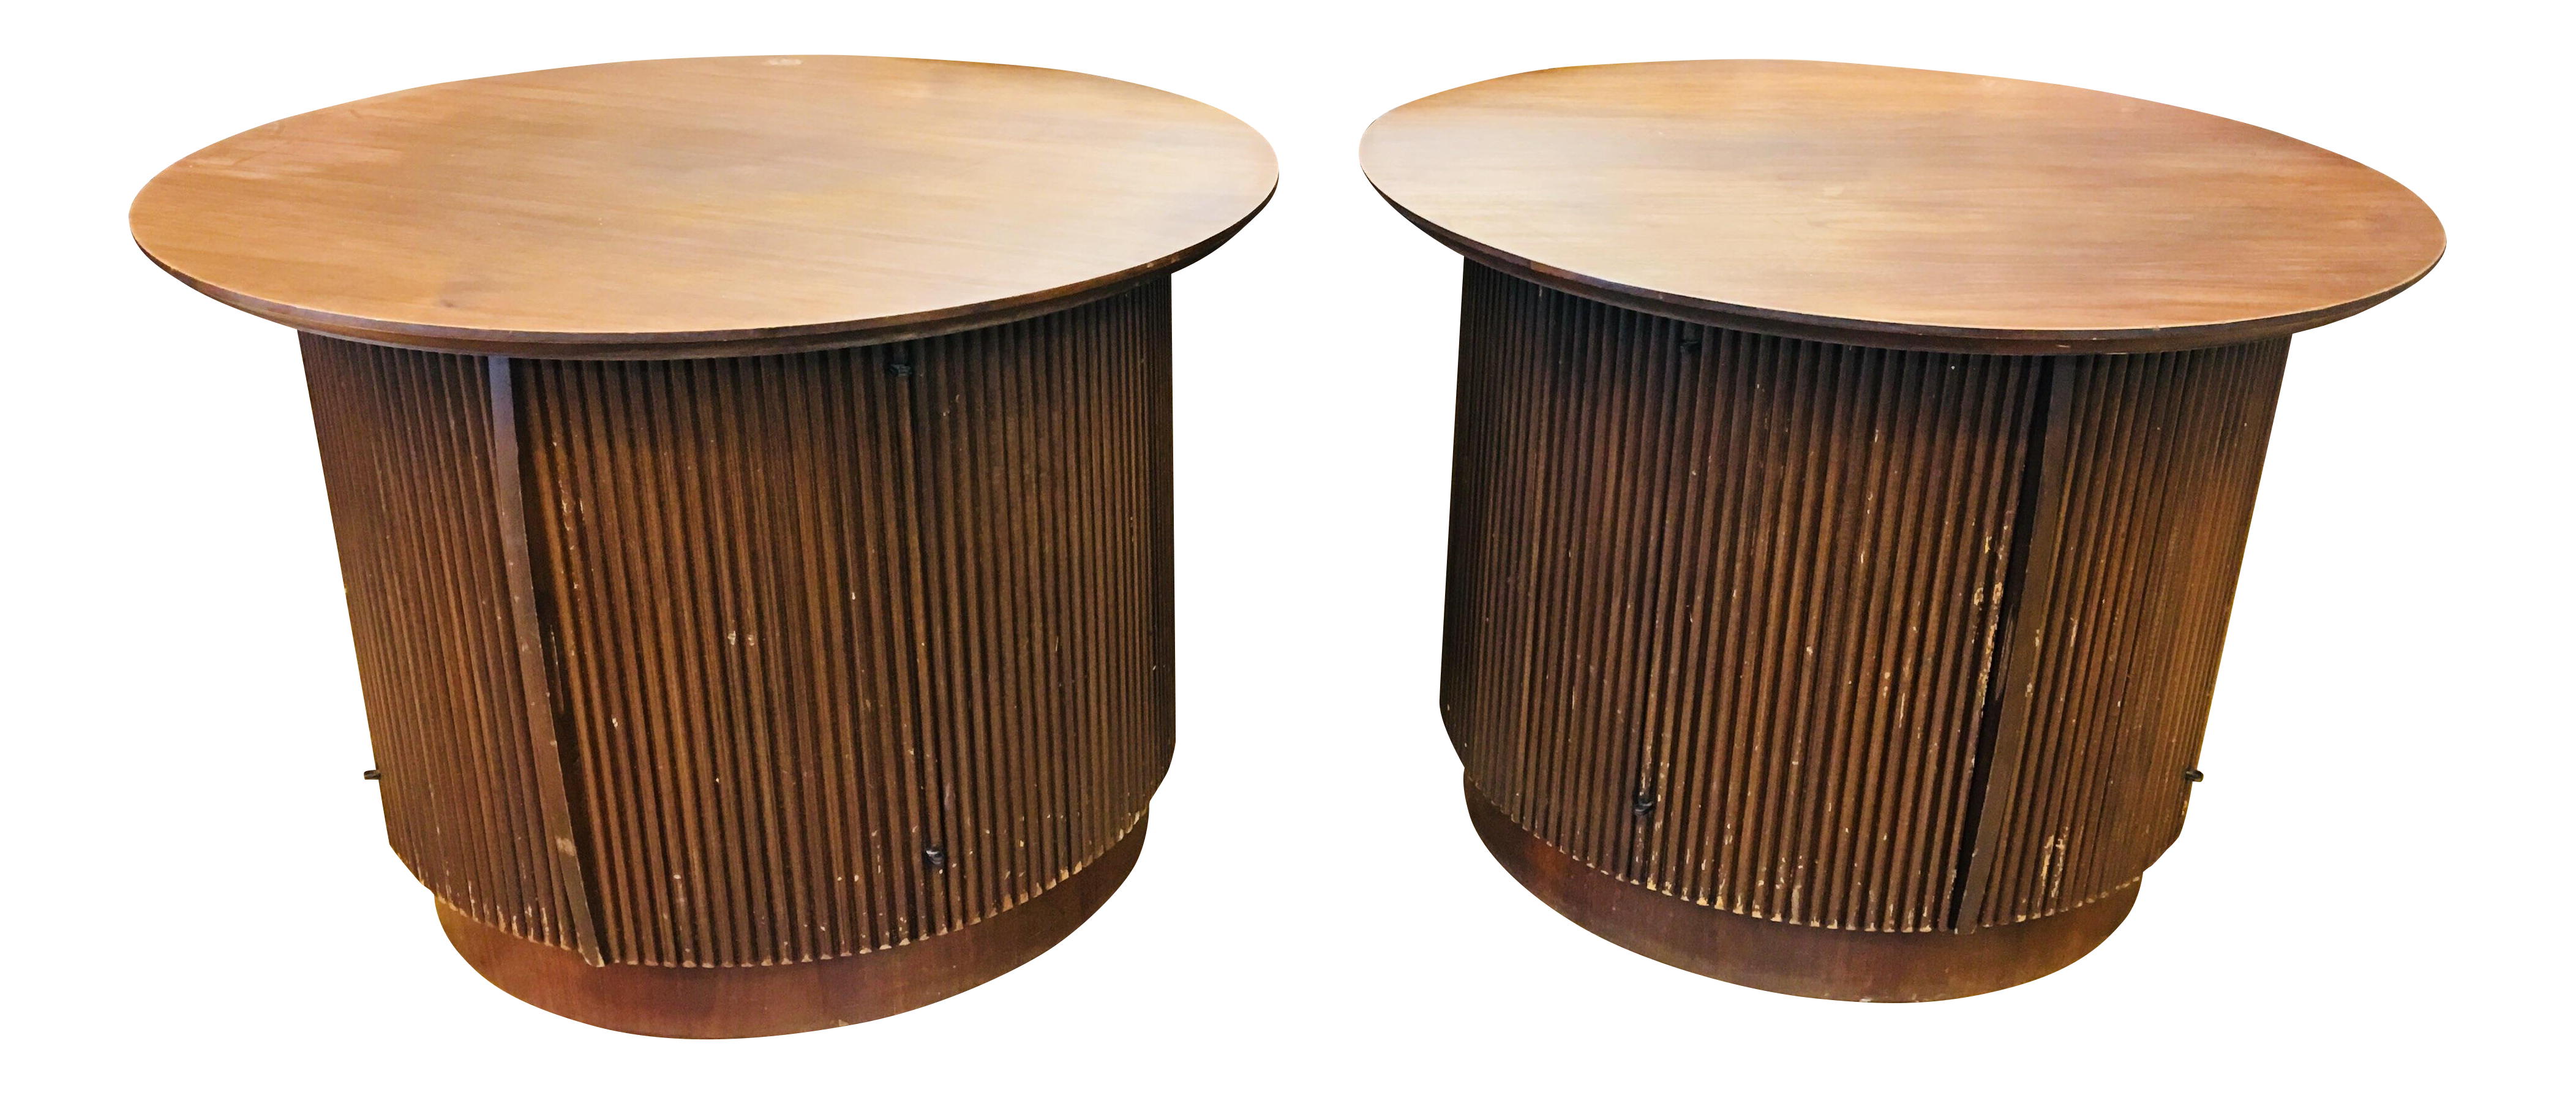 lane mid century drum walnut tambour side tables pair chairish outdoor table furniture decorative mirrors home decor ornaments best coffee for small living rooms simple trestle